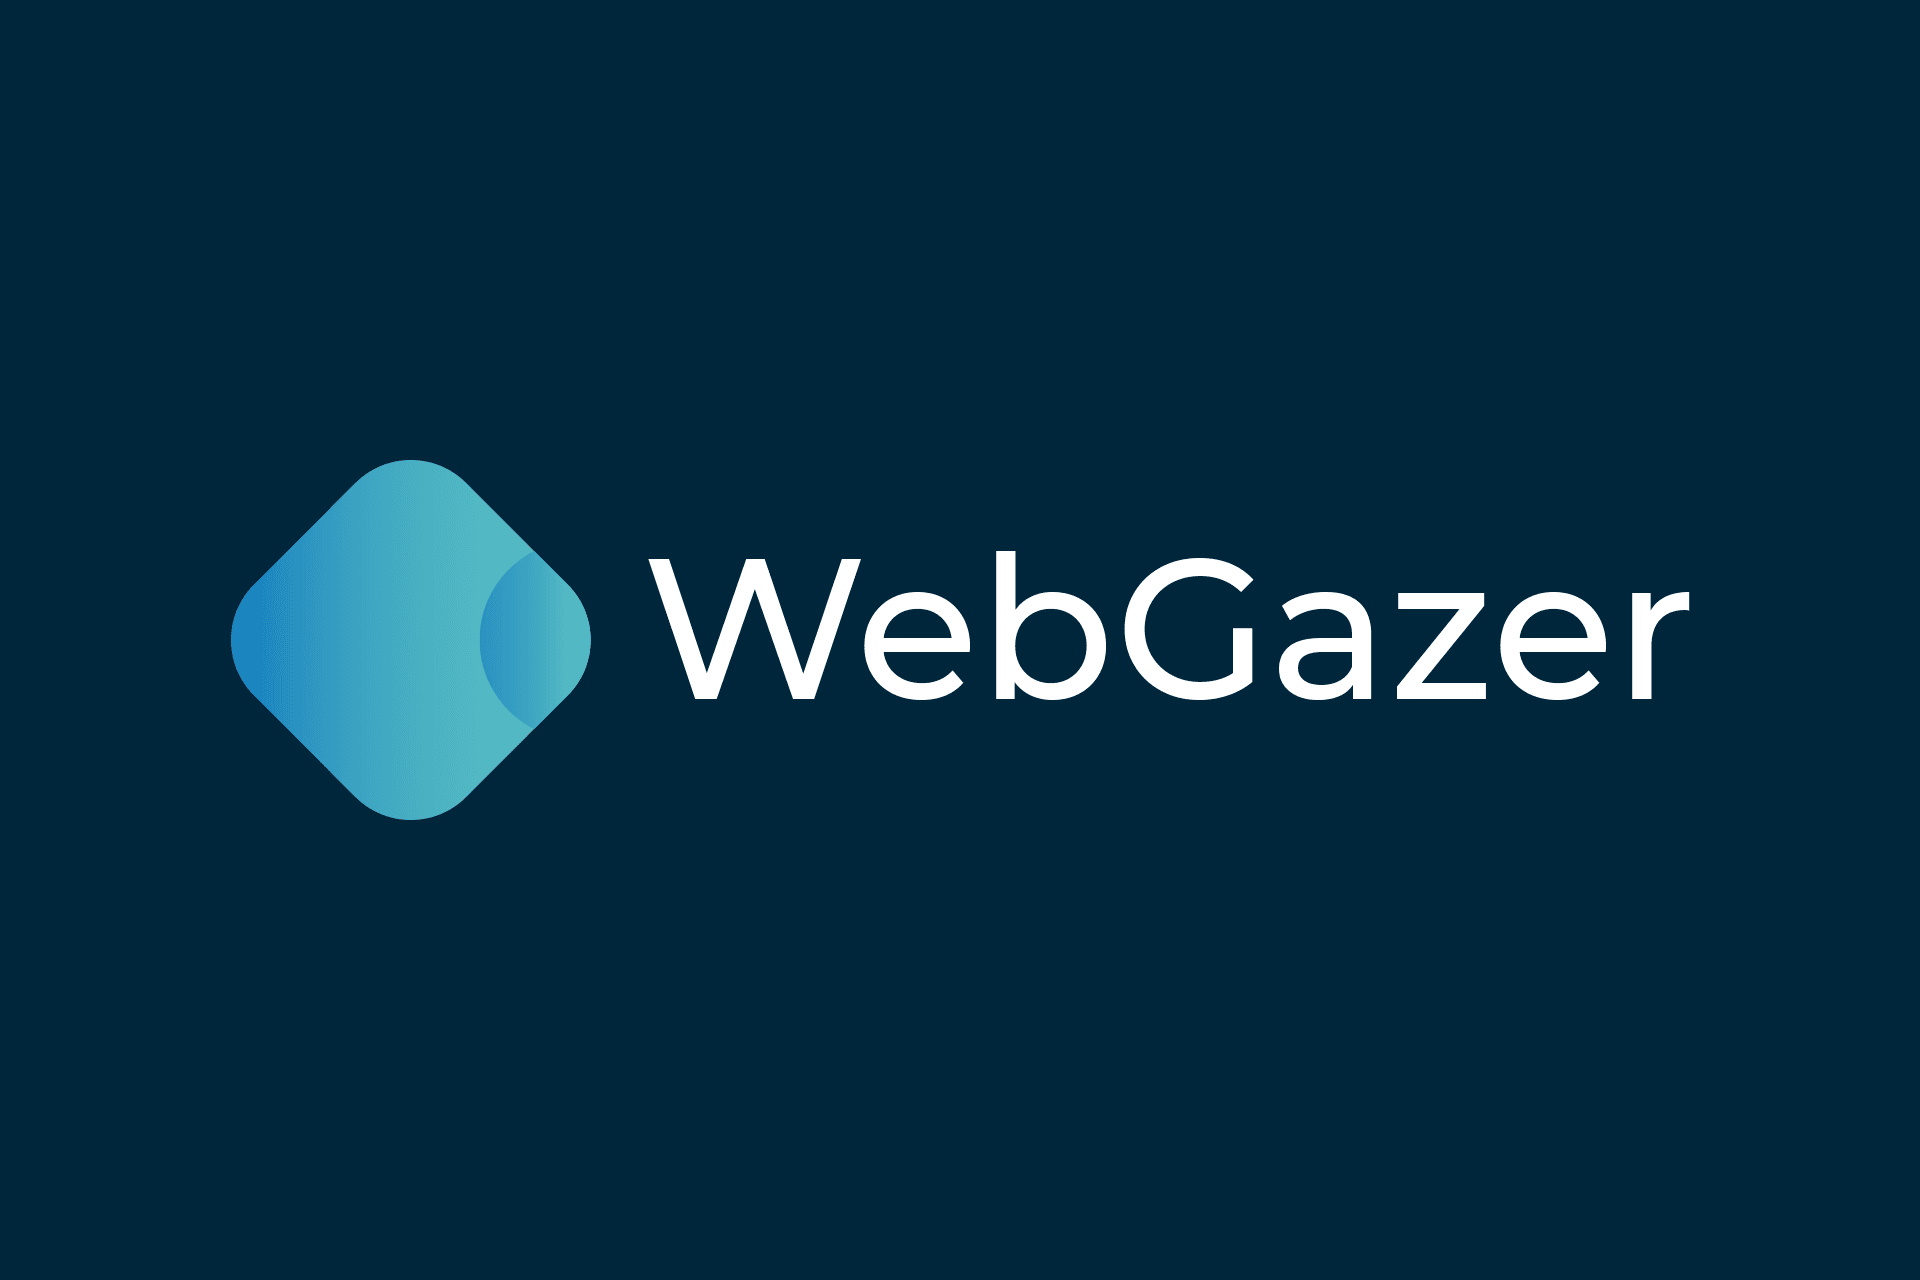 A little bit about the vision of the WebGazer